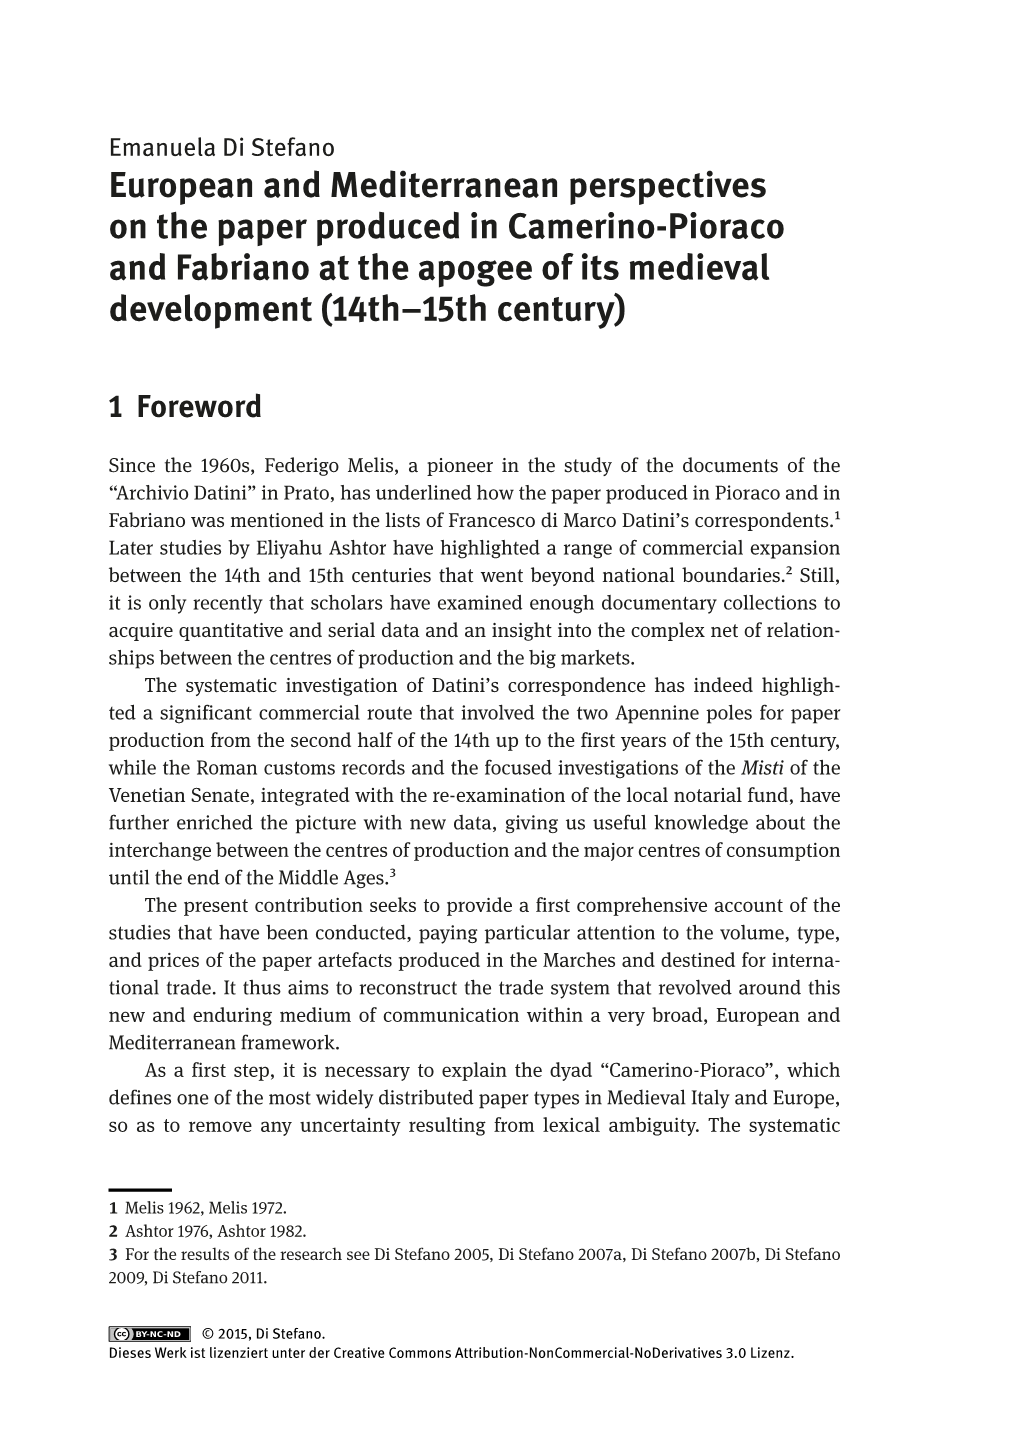 European and Mediterranean Perspectives on the Paper Produced in Camerino-Pioraco and Fabriano at the Apogee of Its Medieval Development (14Th–15Th Century)